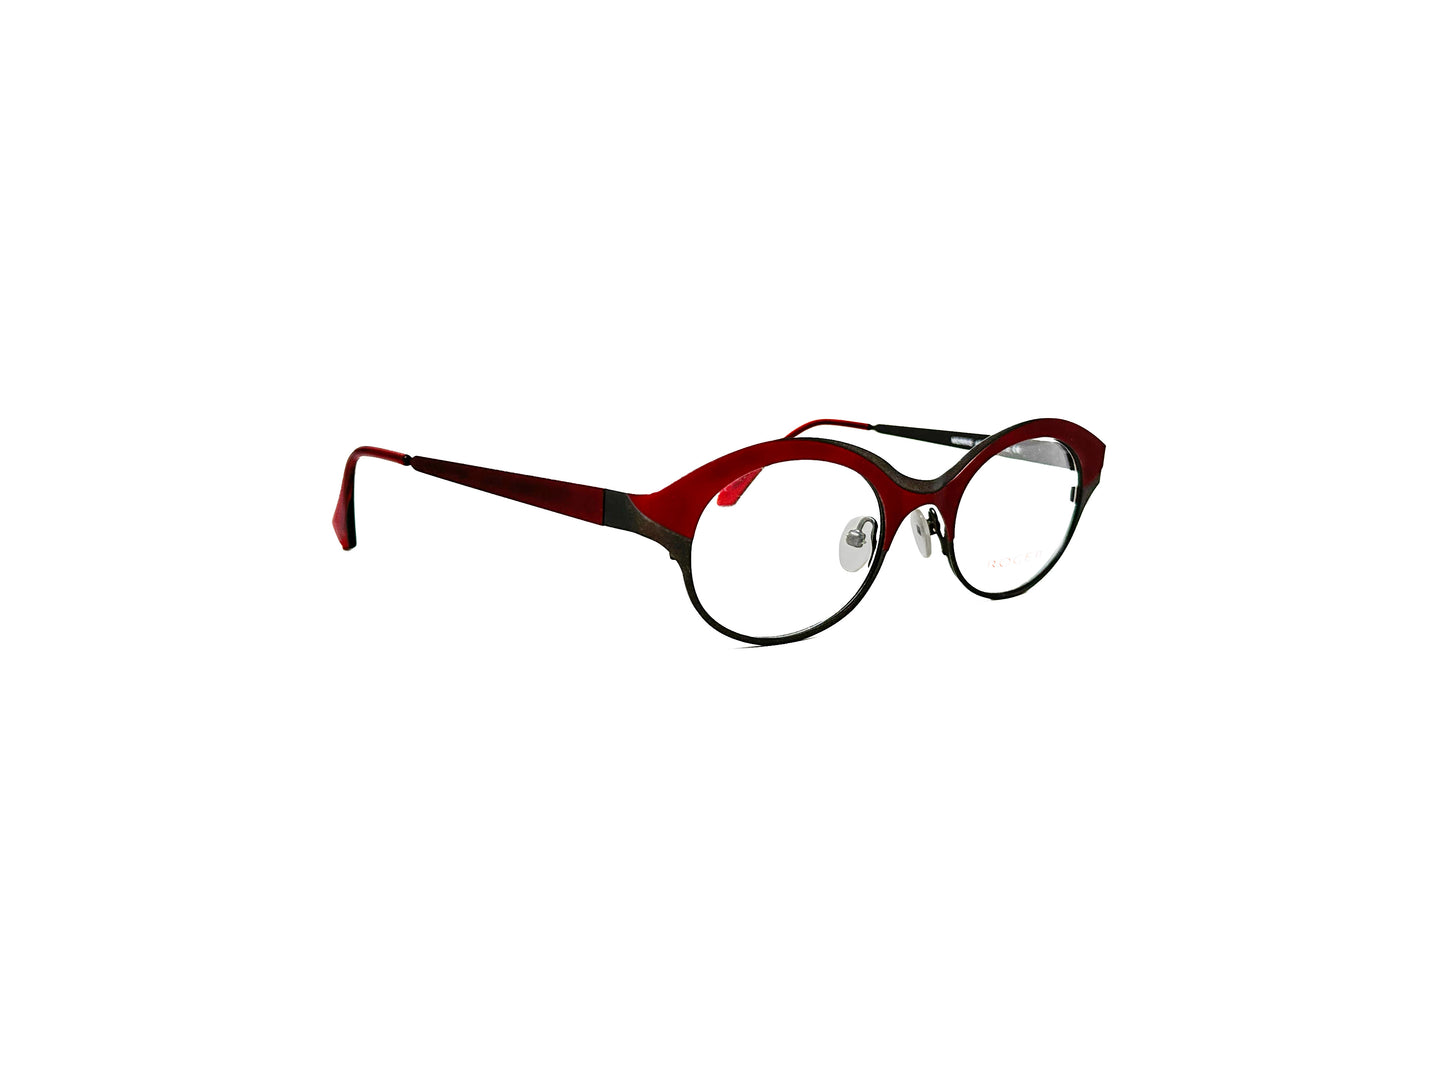 Roger metal, oval optical frame, with frame thicker on top than bottom. Model: Morris. Color: 2 - Burgundy & Black. Side view.